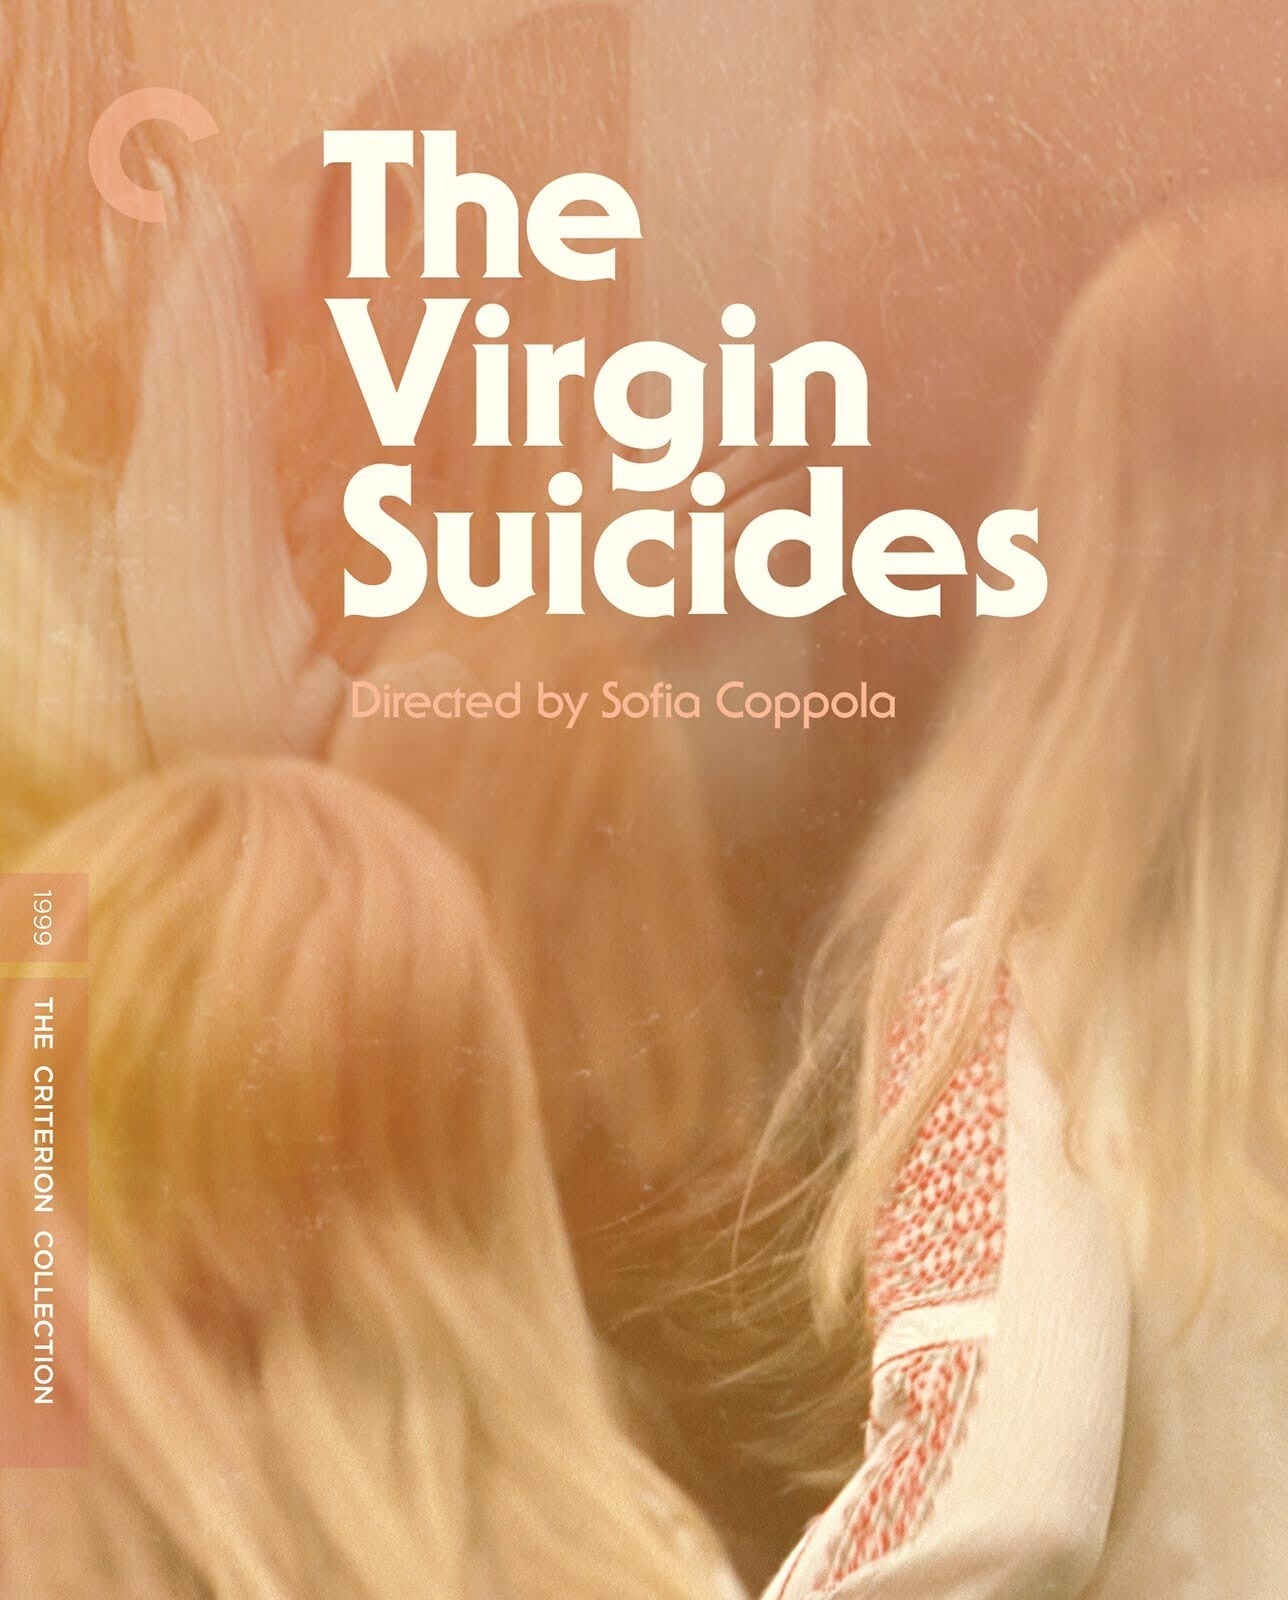 THE VIRGIN SUICIDES 4K UHD/BLU-RAY